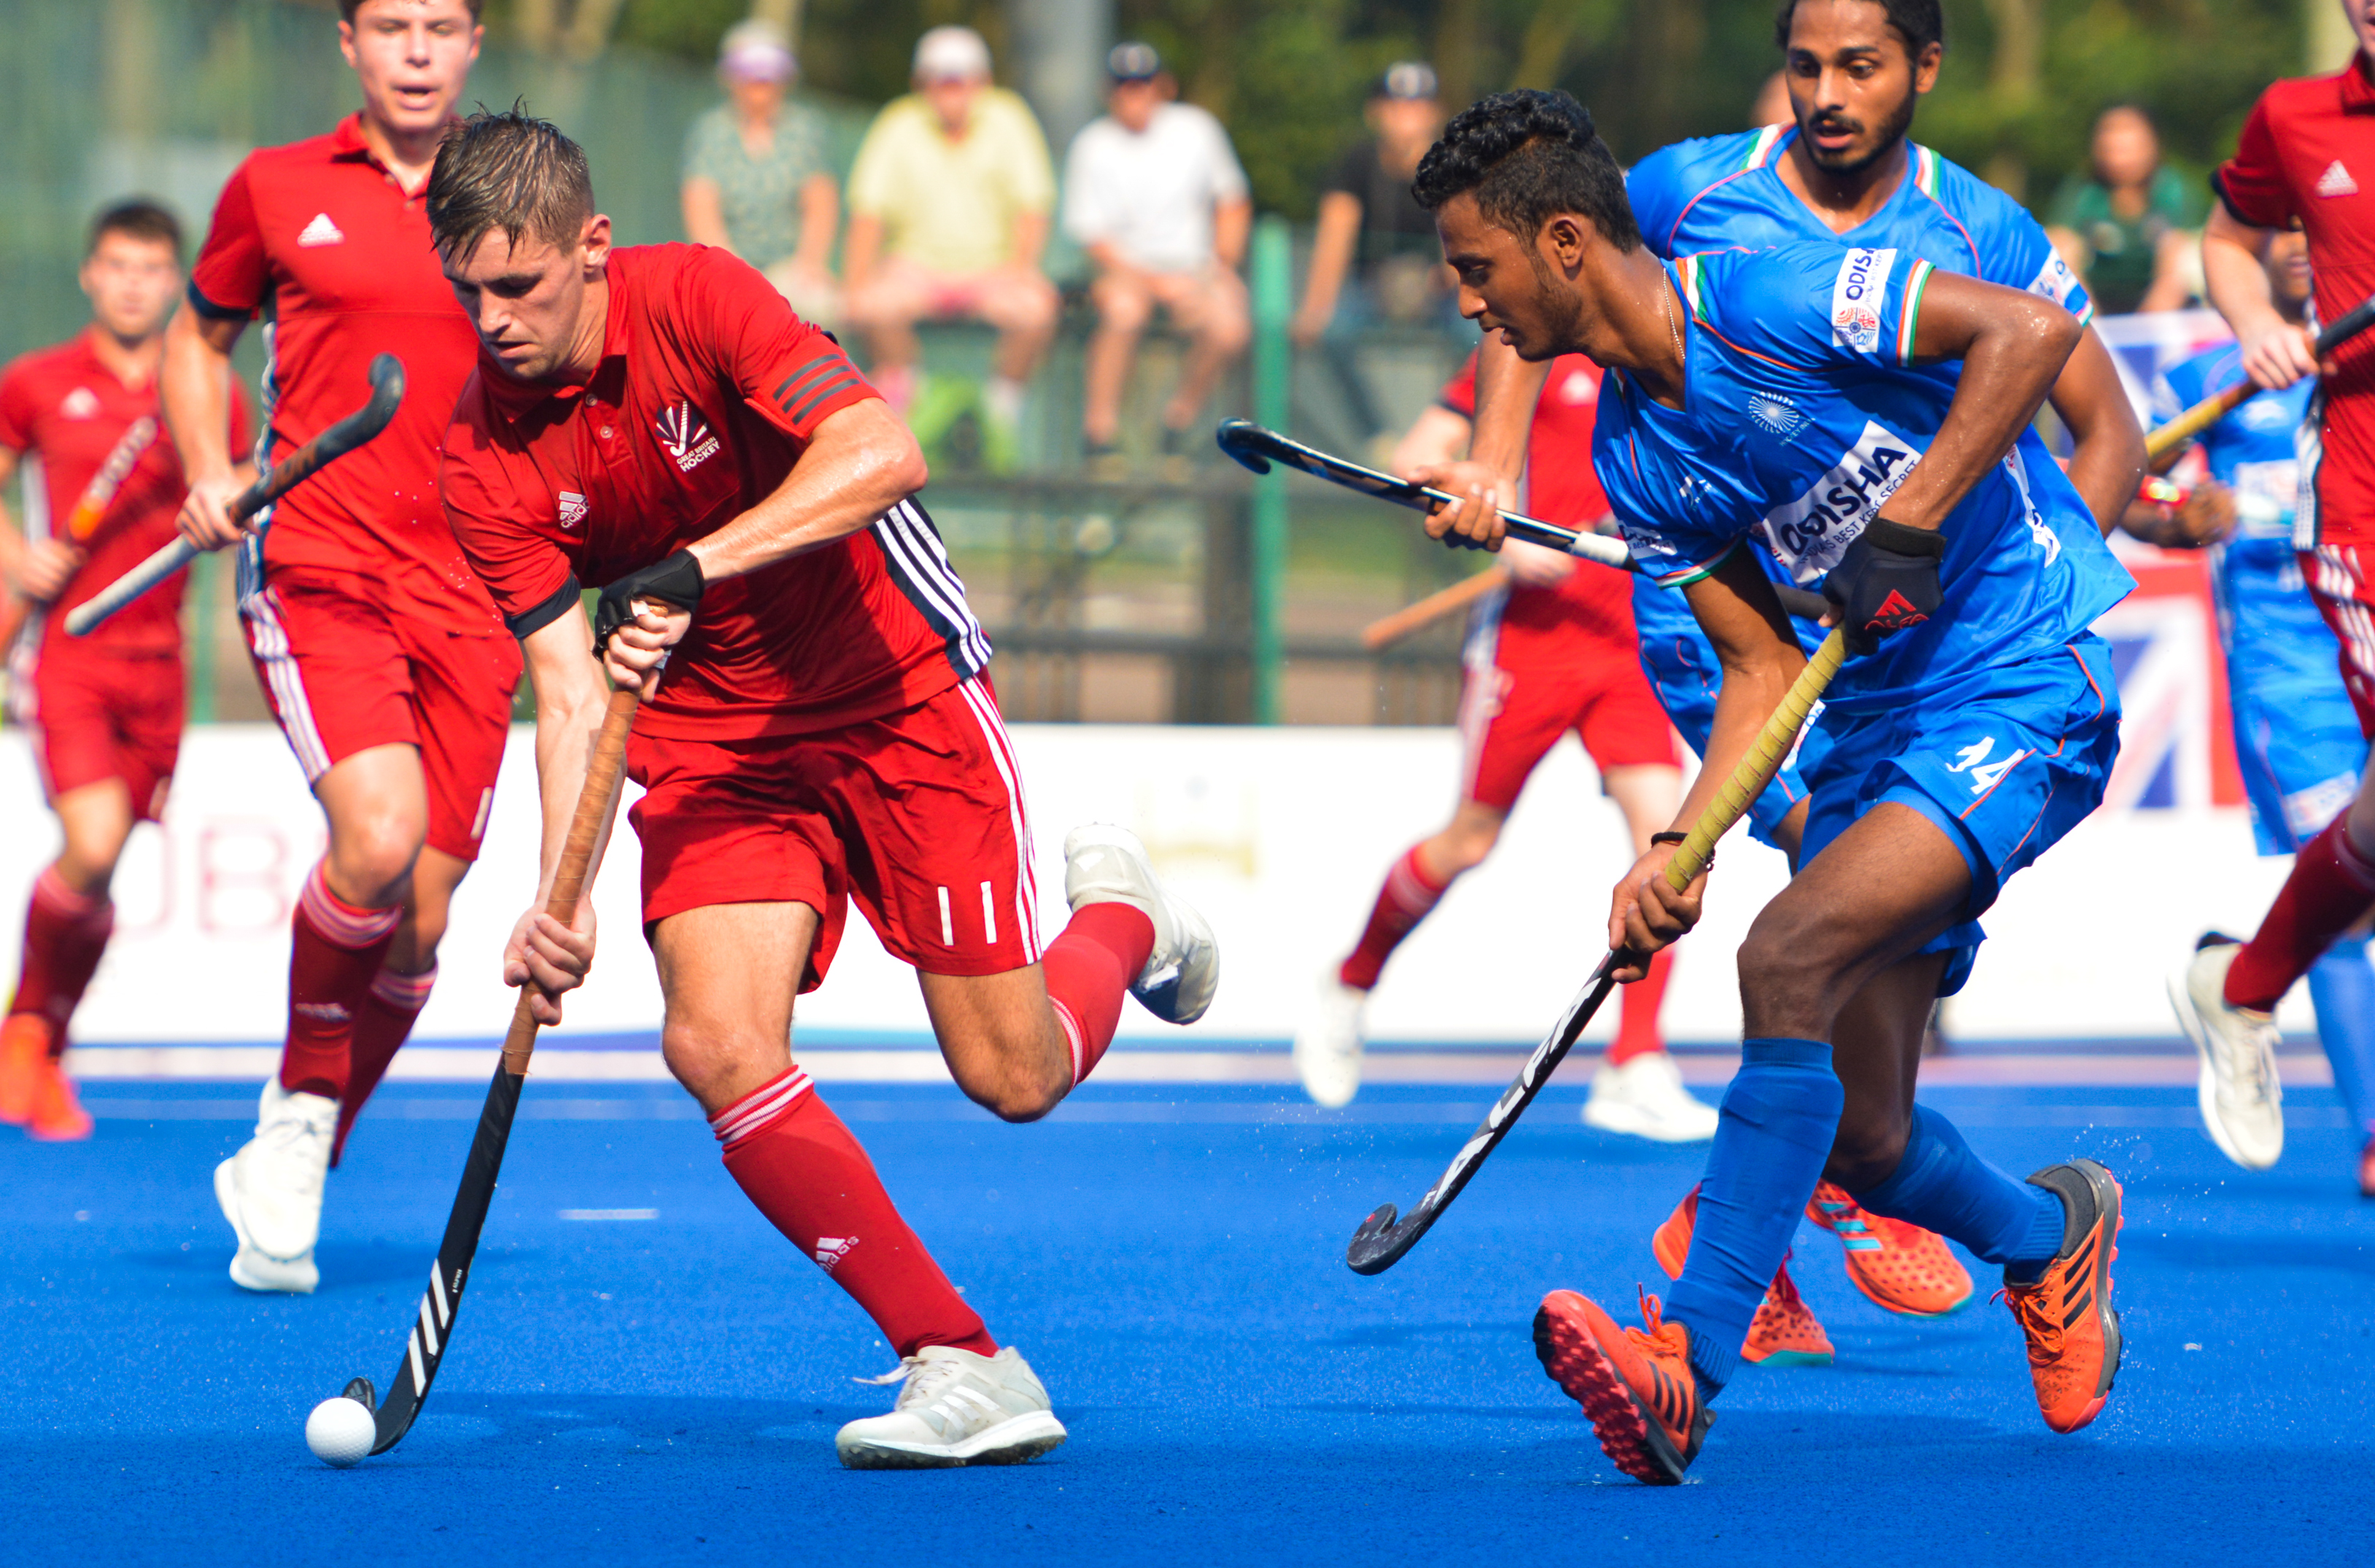 Sultan of Johor Cup | Great Britain hold India to 3-3 draw in last league game